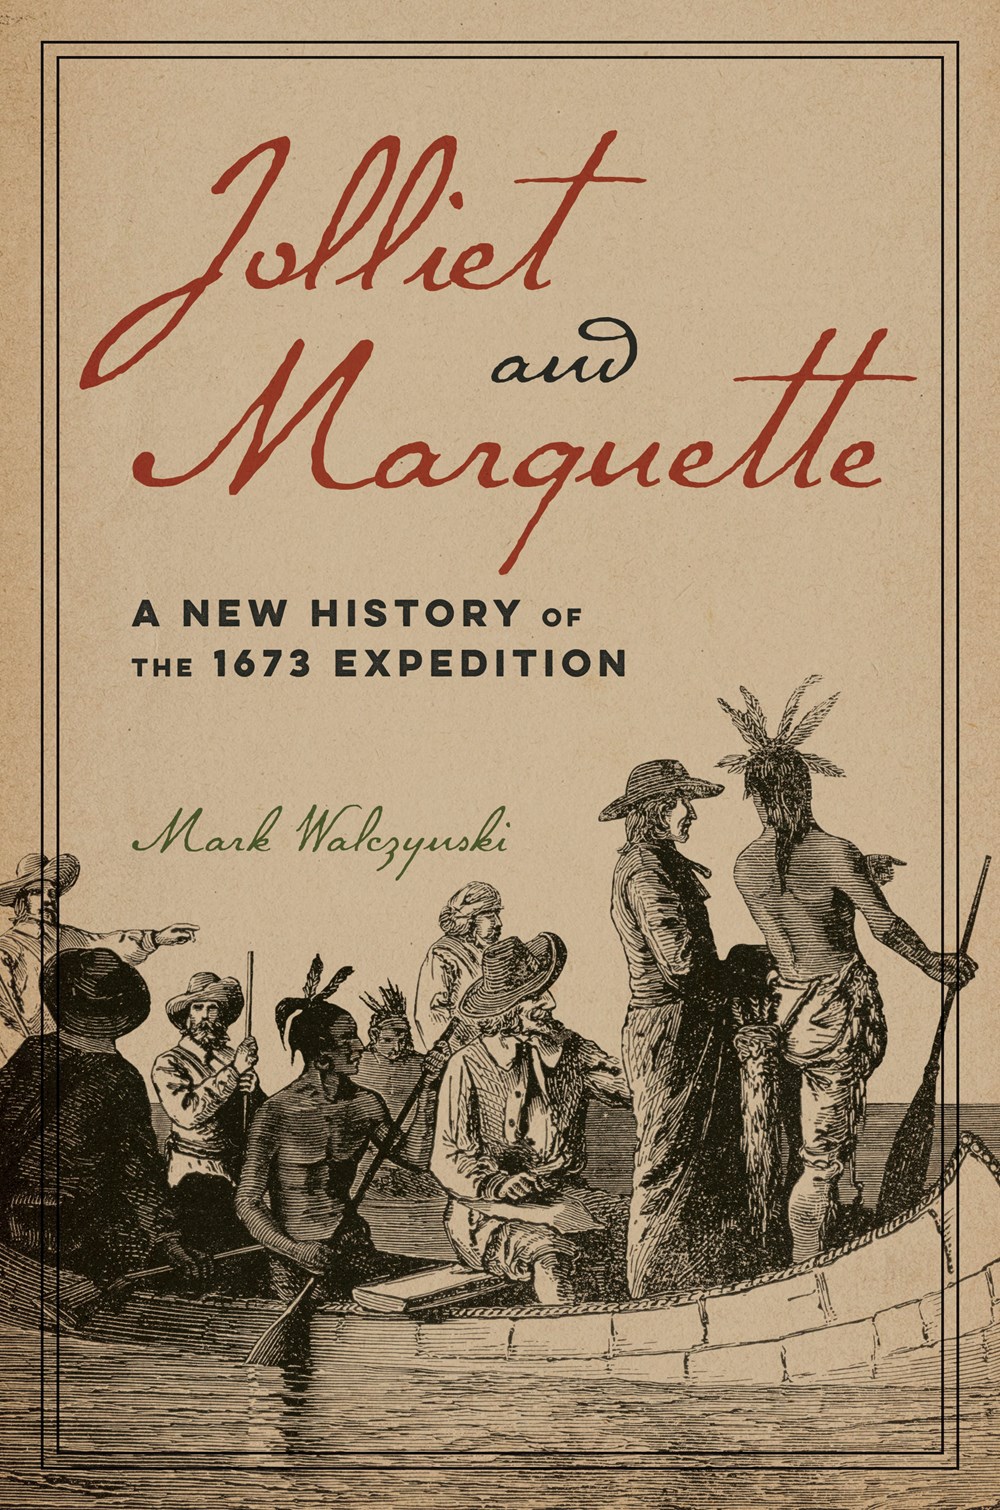 Jolliet and Marquette: A New History of the 1673 Expedition